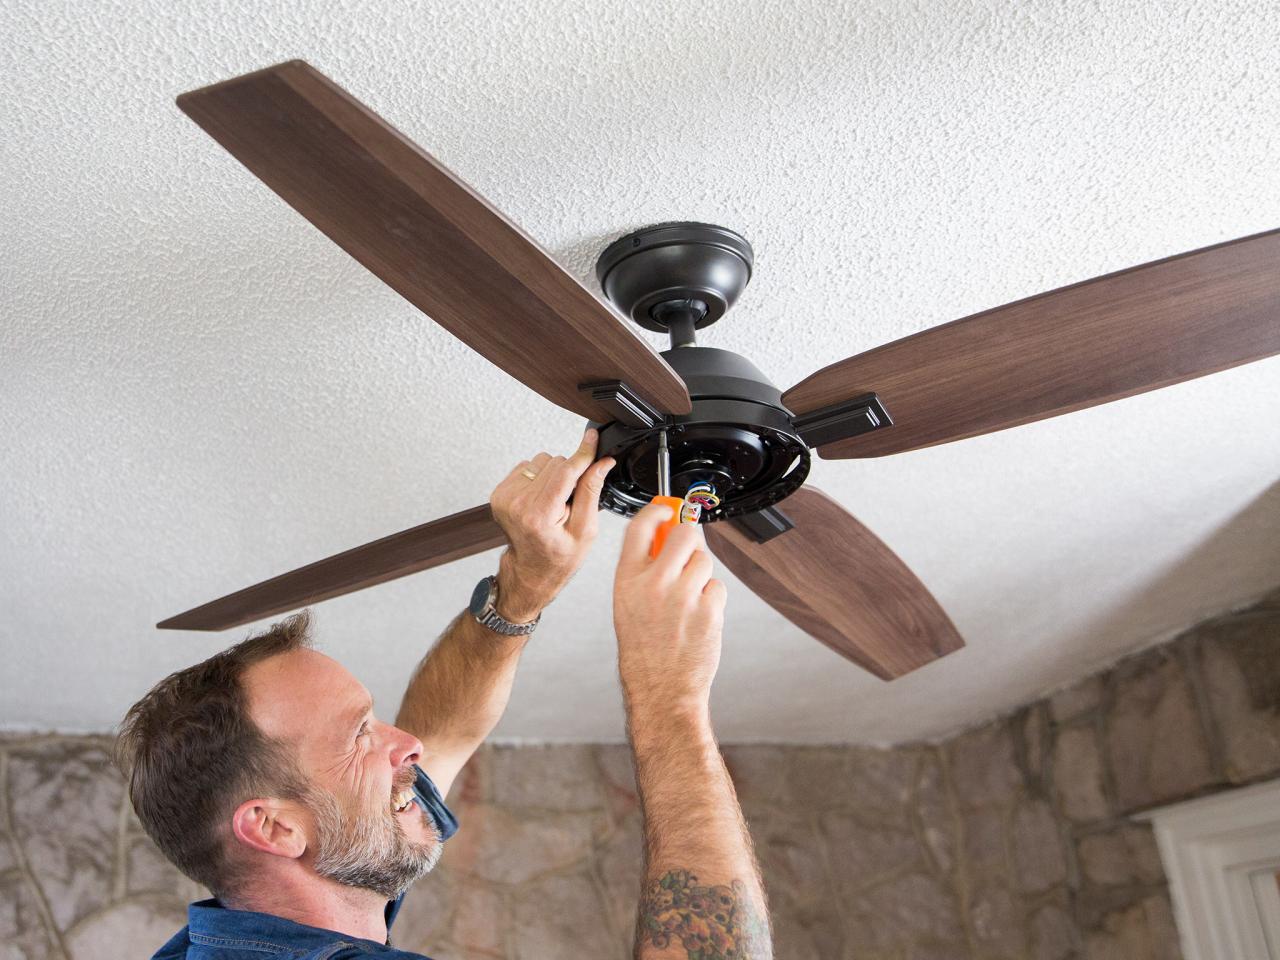 How To Install A Ceiling Fan - How To Mount Ceiling